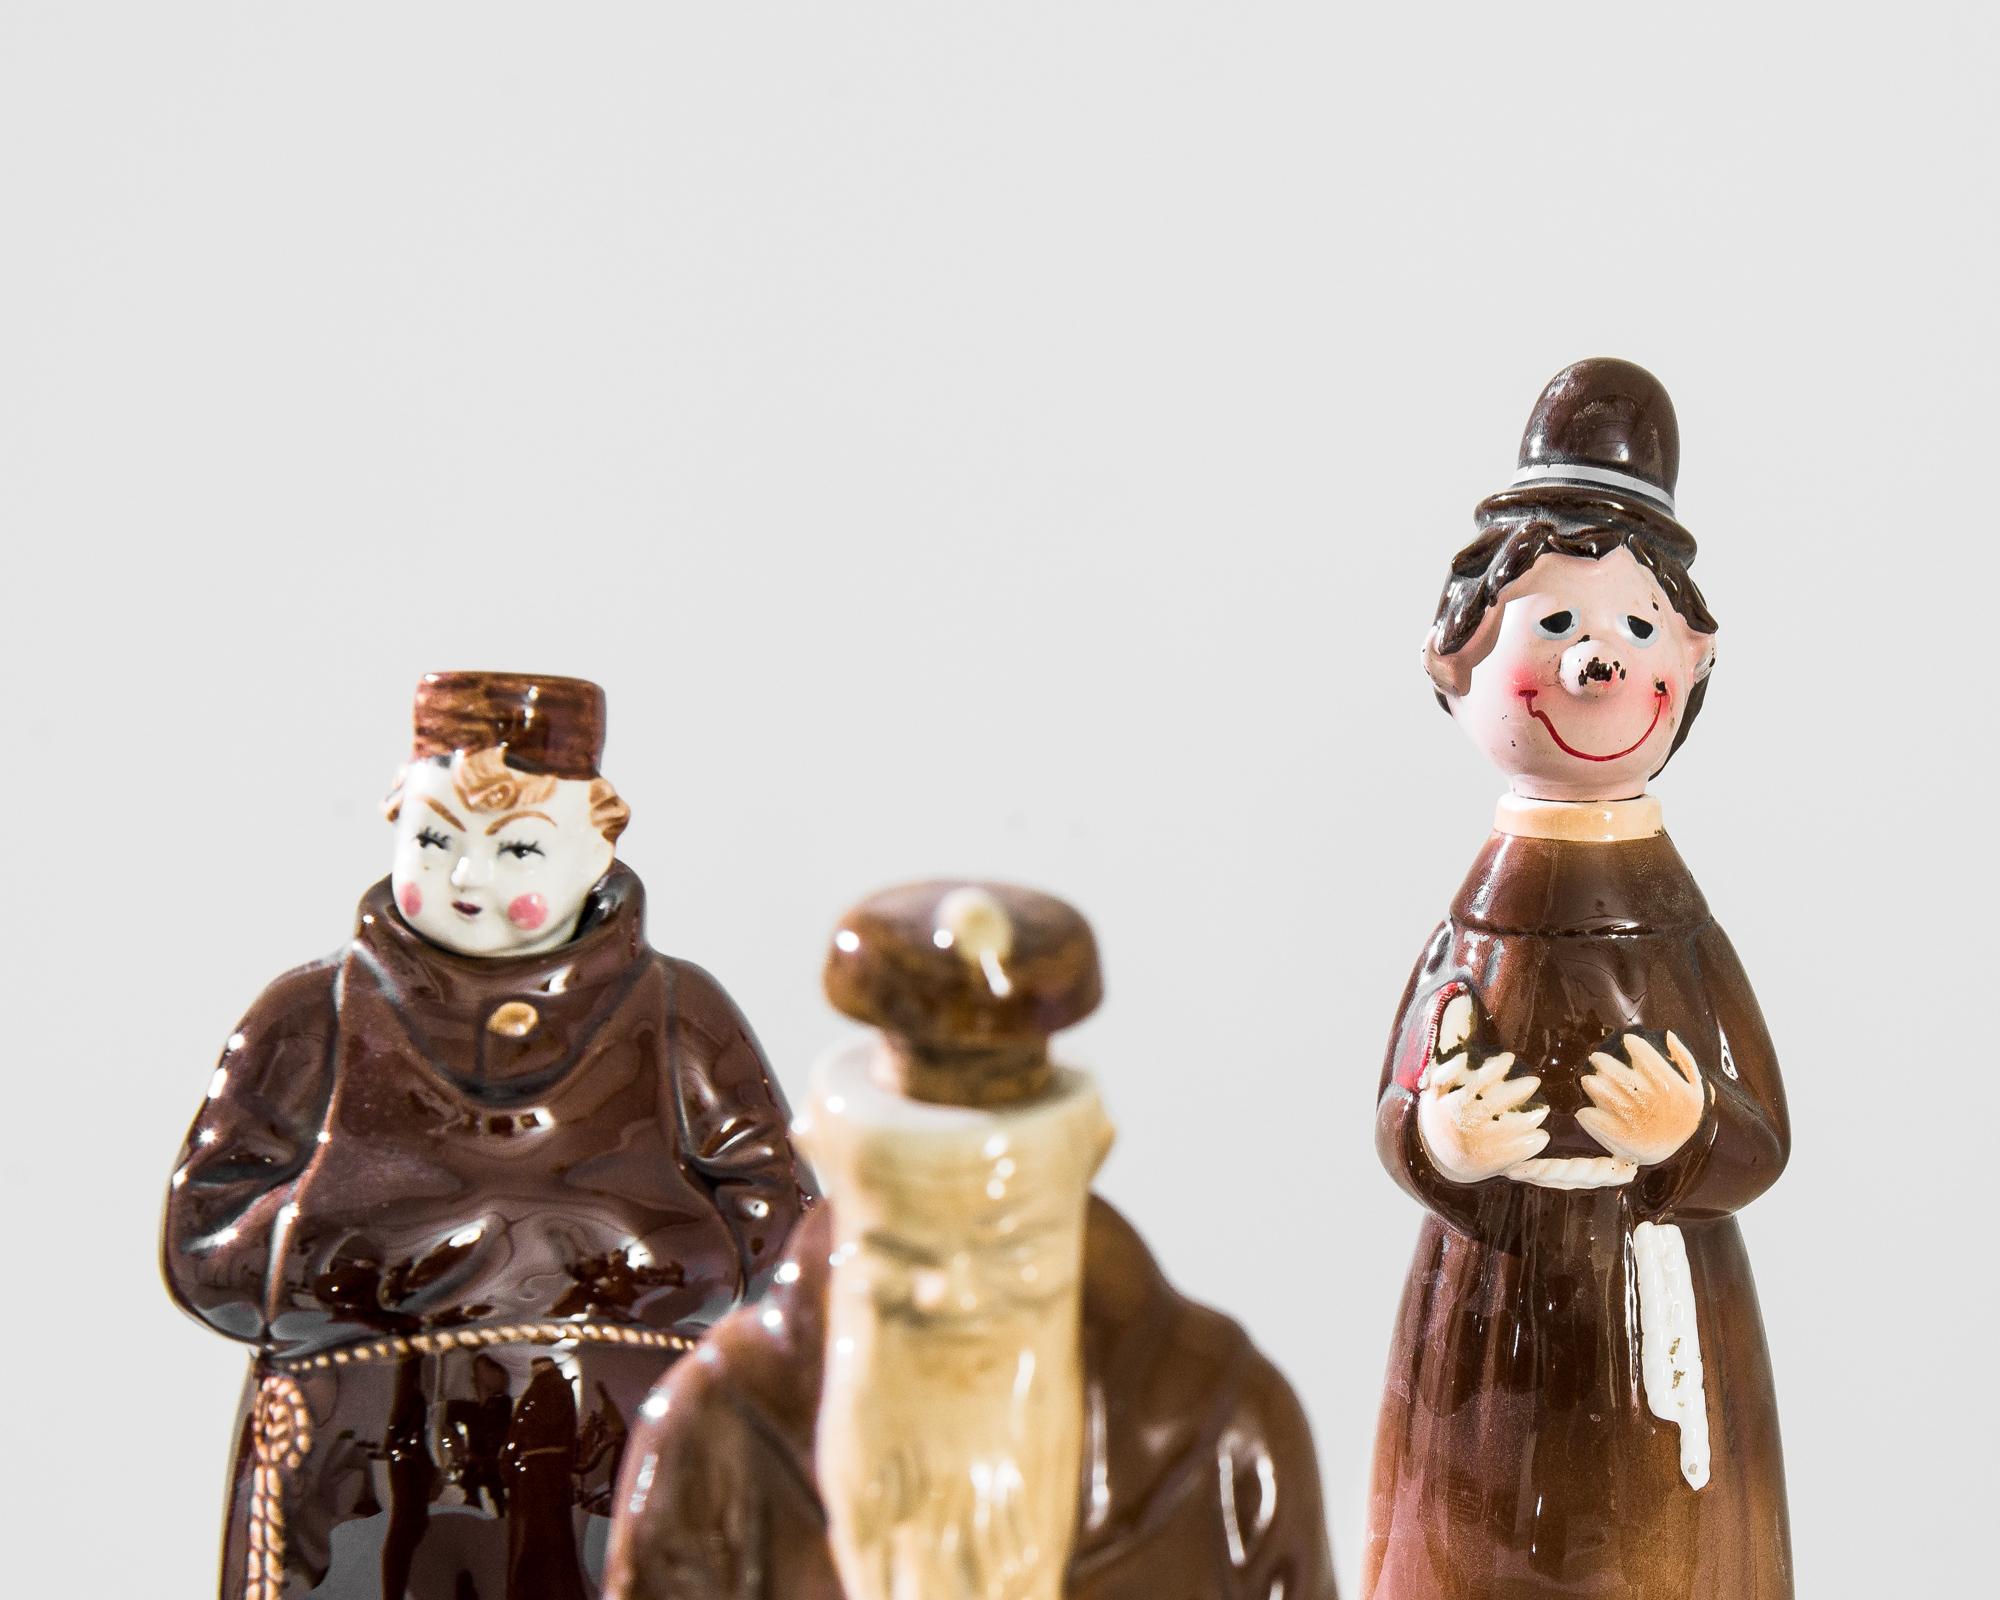 A selection of ceramic bottles from France, produced between the 1950s and 1970s. With their floor length brown cassocks cinched at thick waists with a rope, these friar themed vintage bottles bring with them a feeling of jovial piety and general